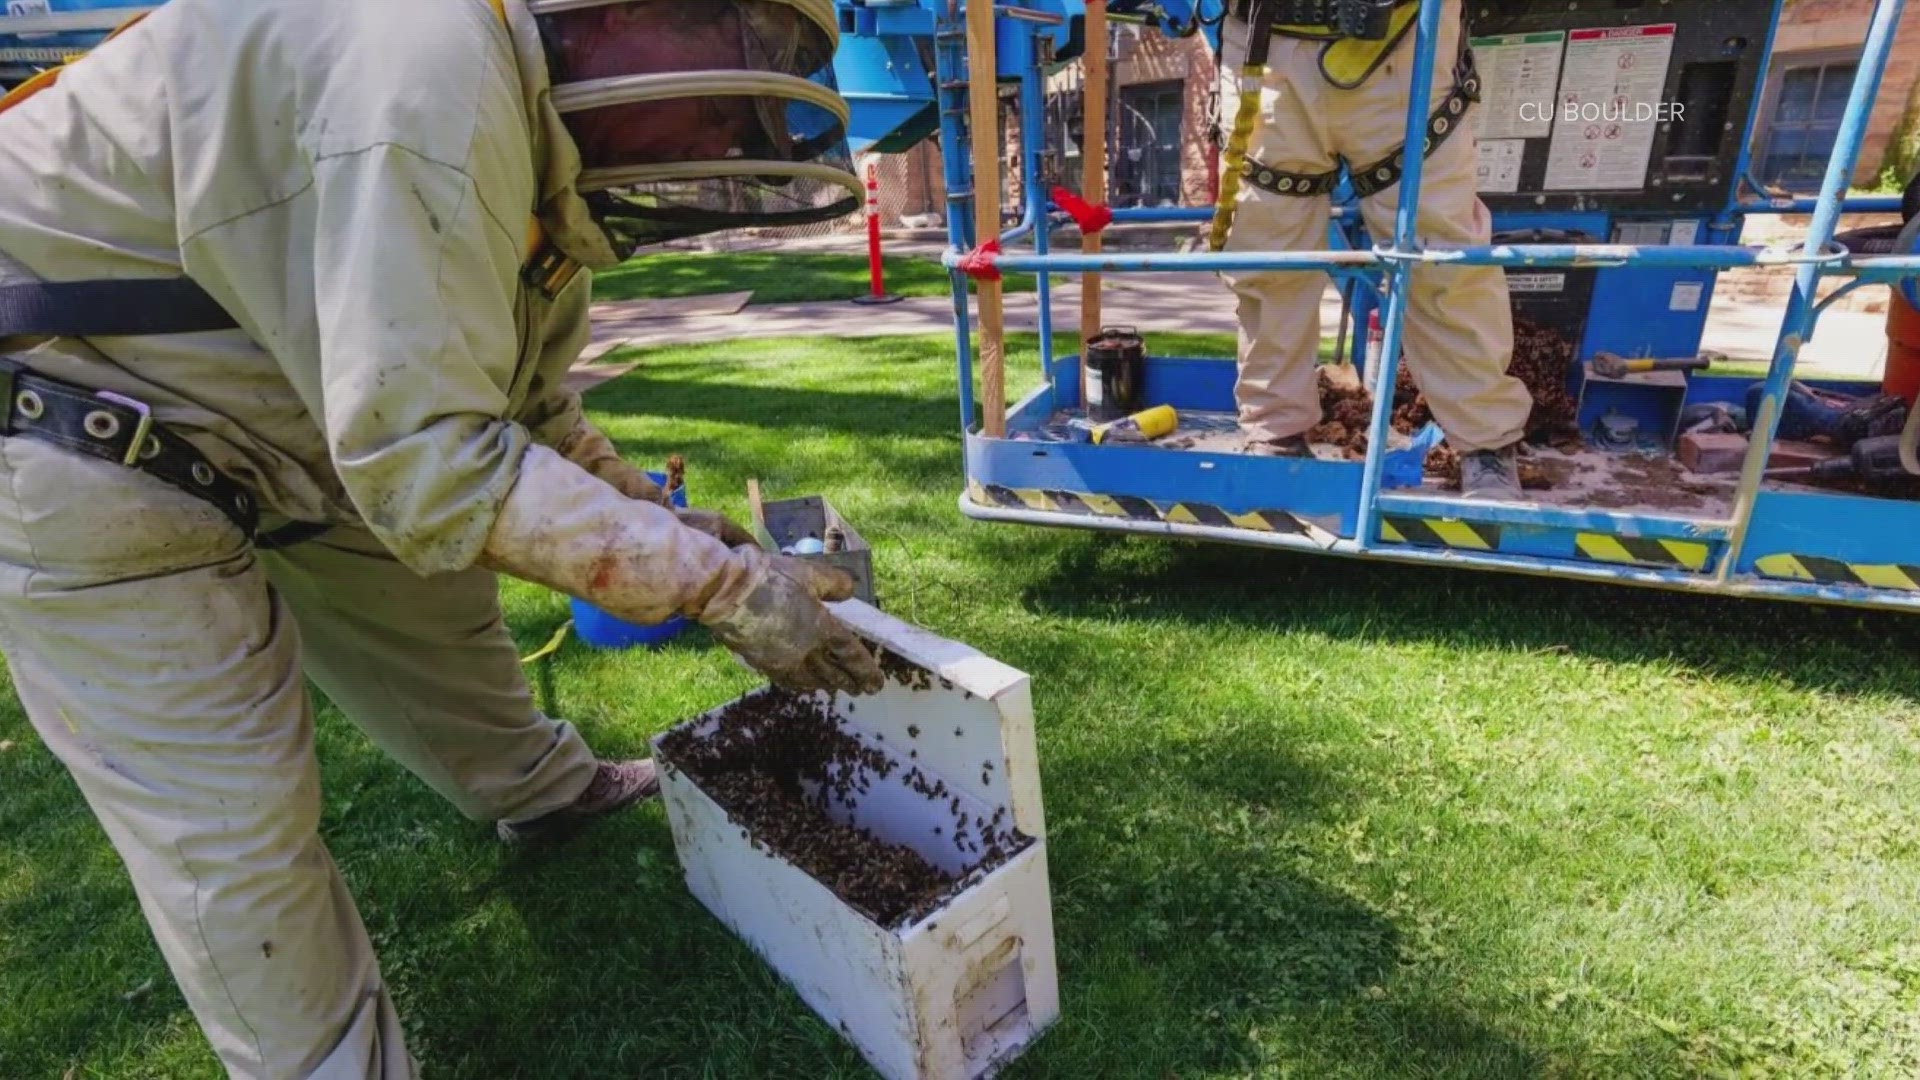 Two beehives were discovered in the Old Main building – the beekeeper hired to rehome them said it's rare to find hives that have survived this long.